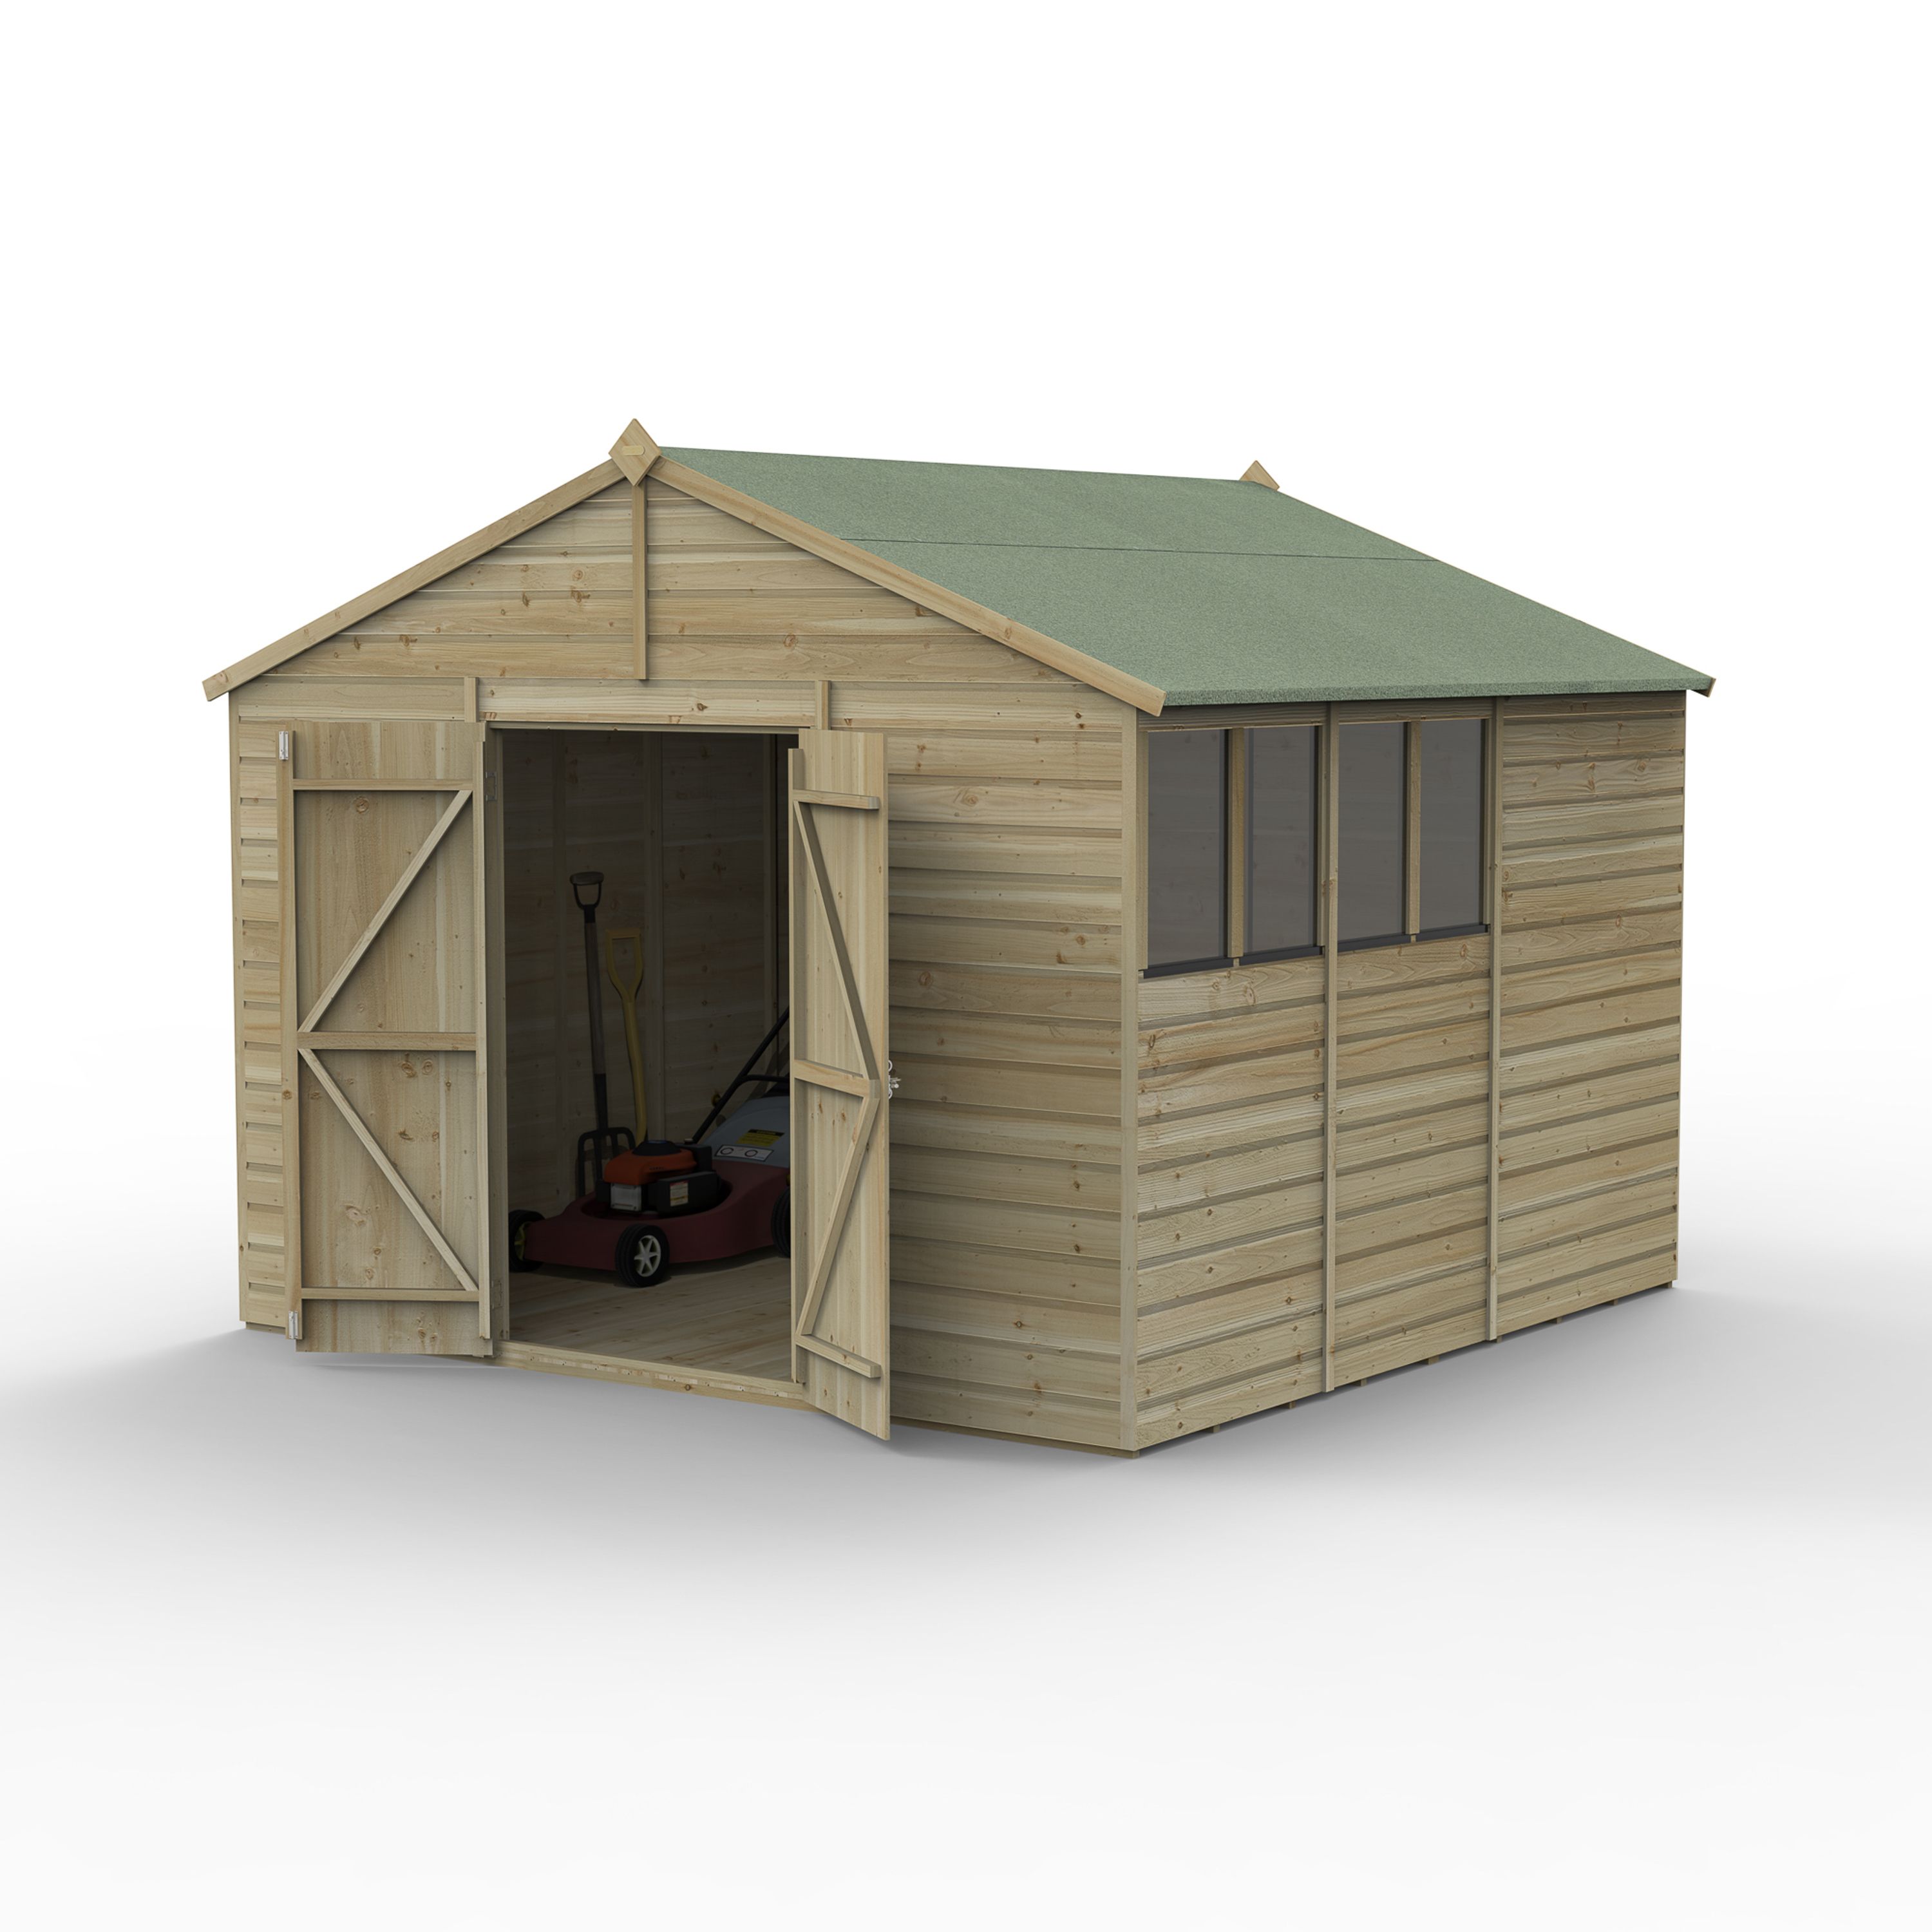 Forest Garden Beckwood 10x10 ft Apex Natural timber Wooden 2 door Shed with floor & 4 windows (Base included)